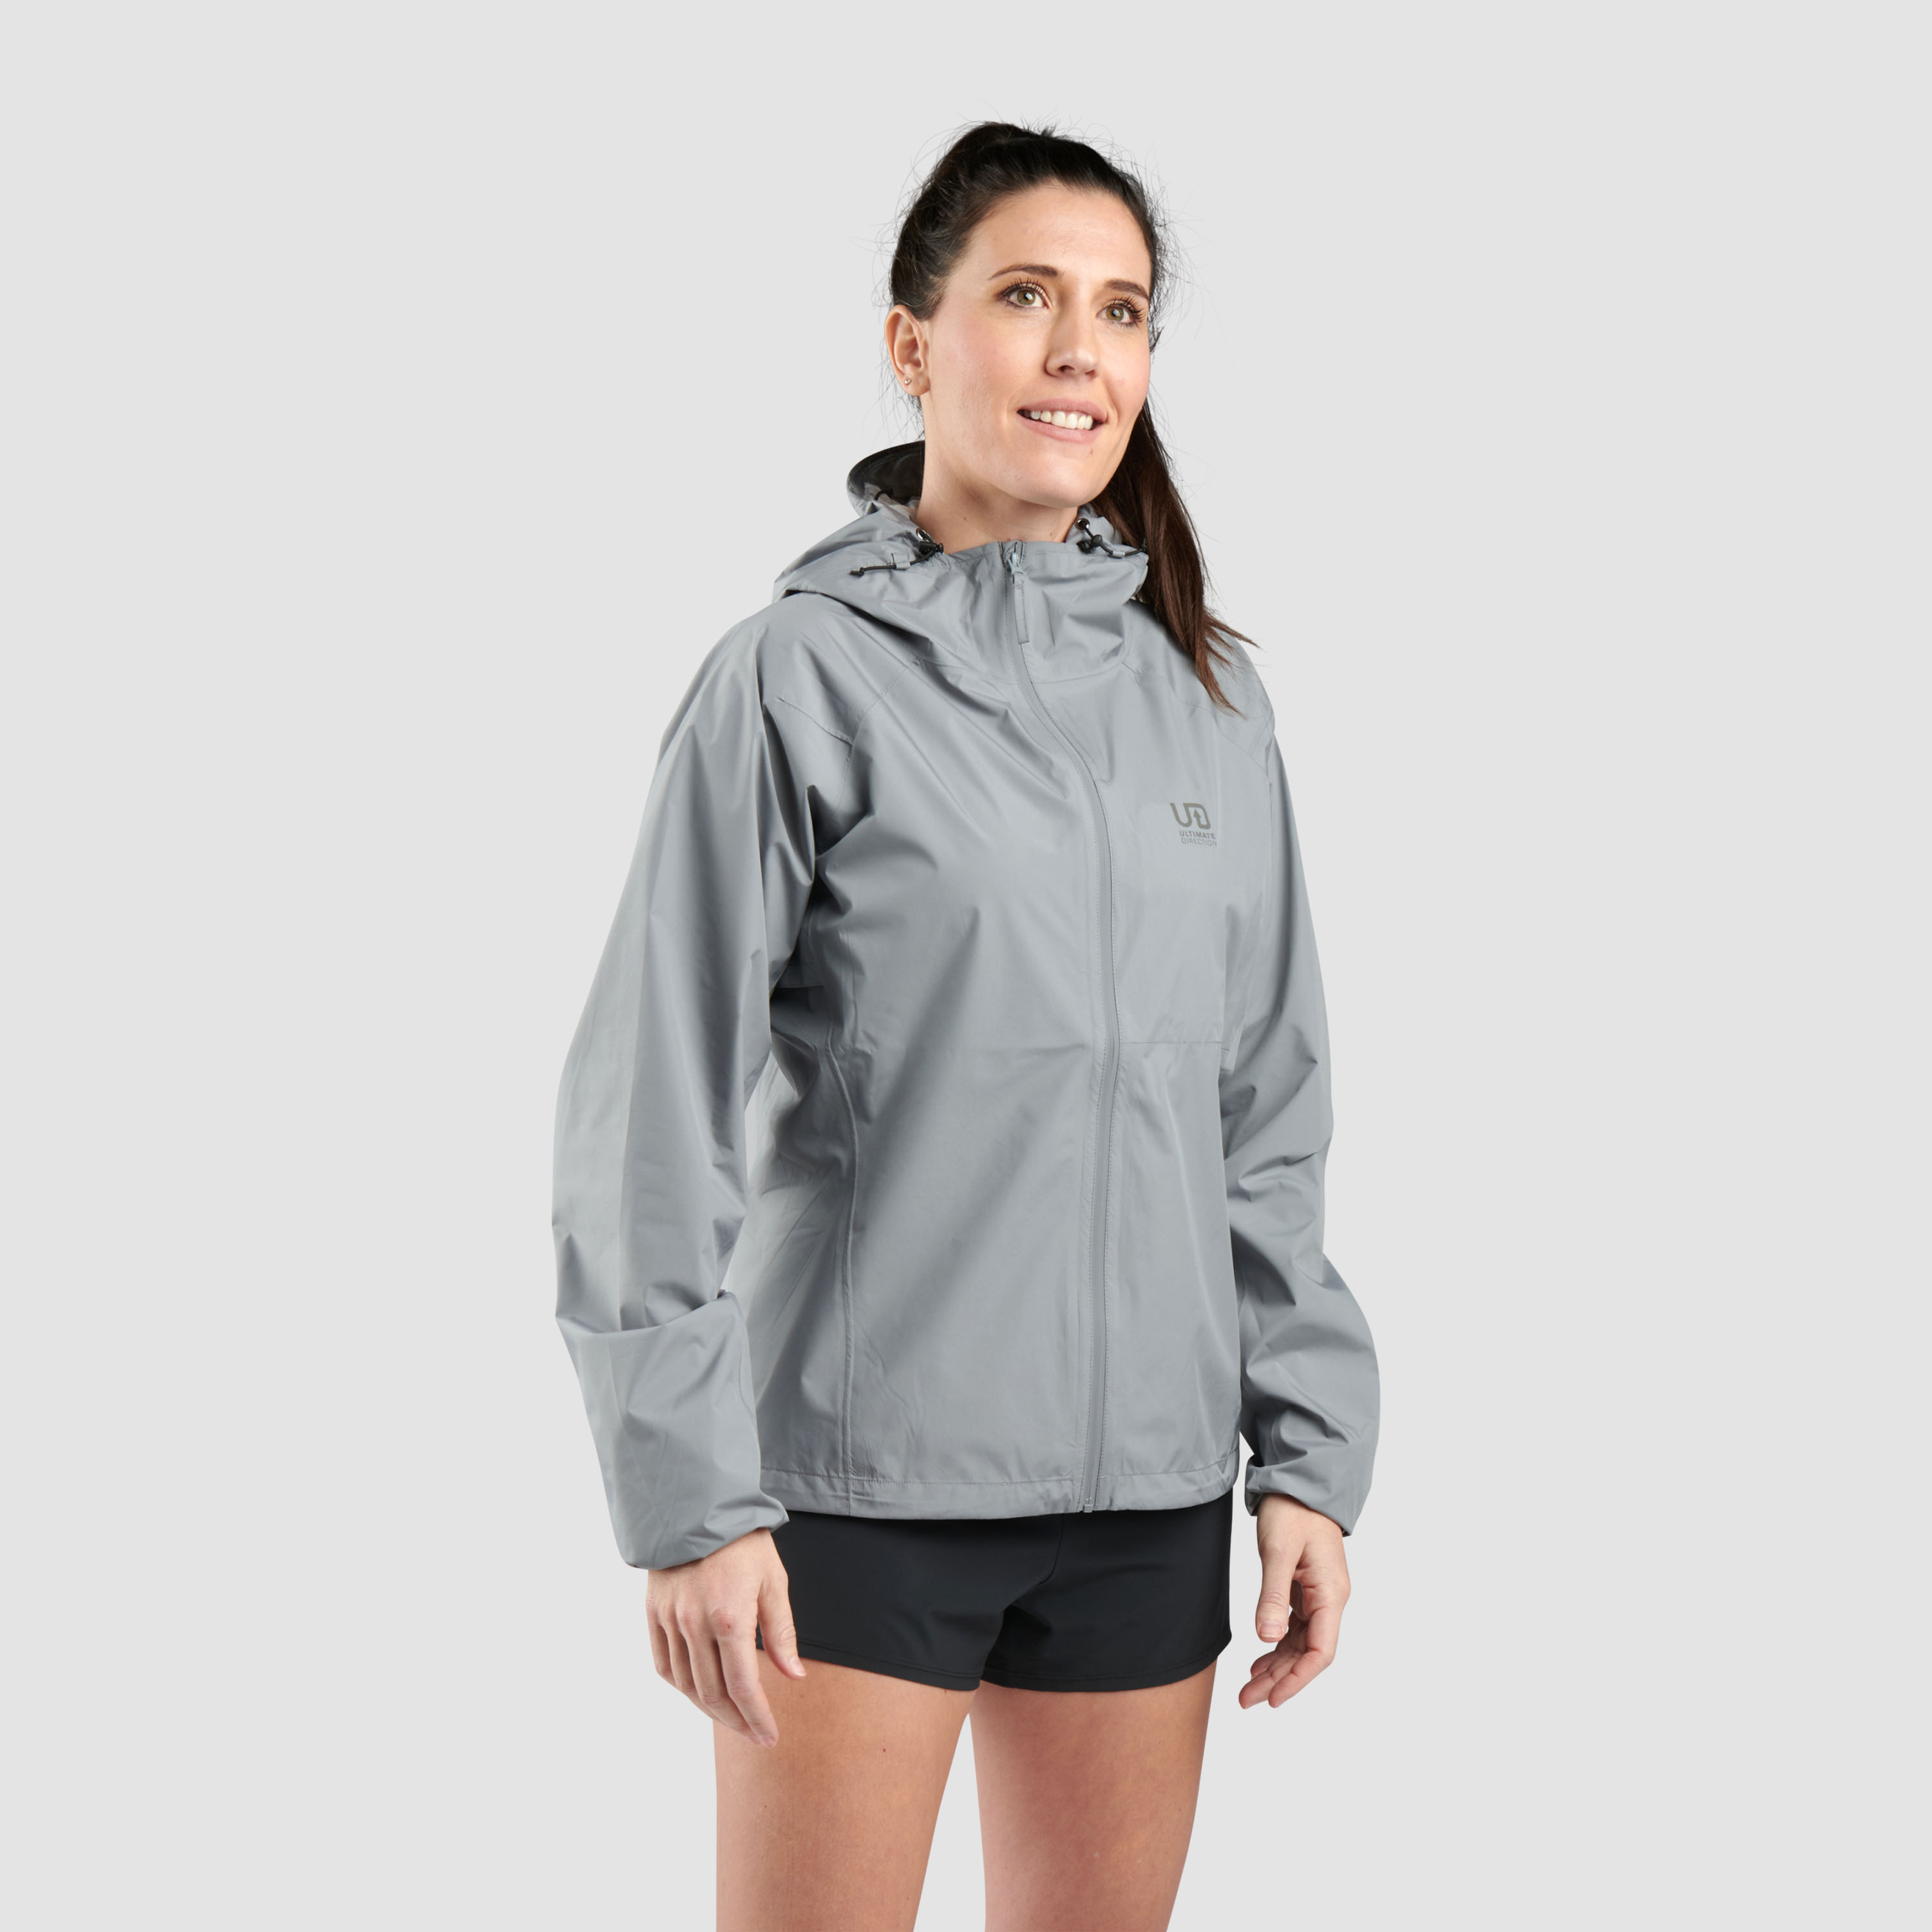 Ultimate Direction Women's Deluge Jacket in Gray Size Large